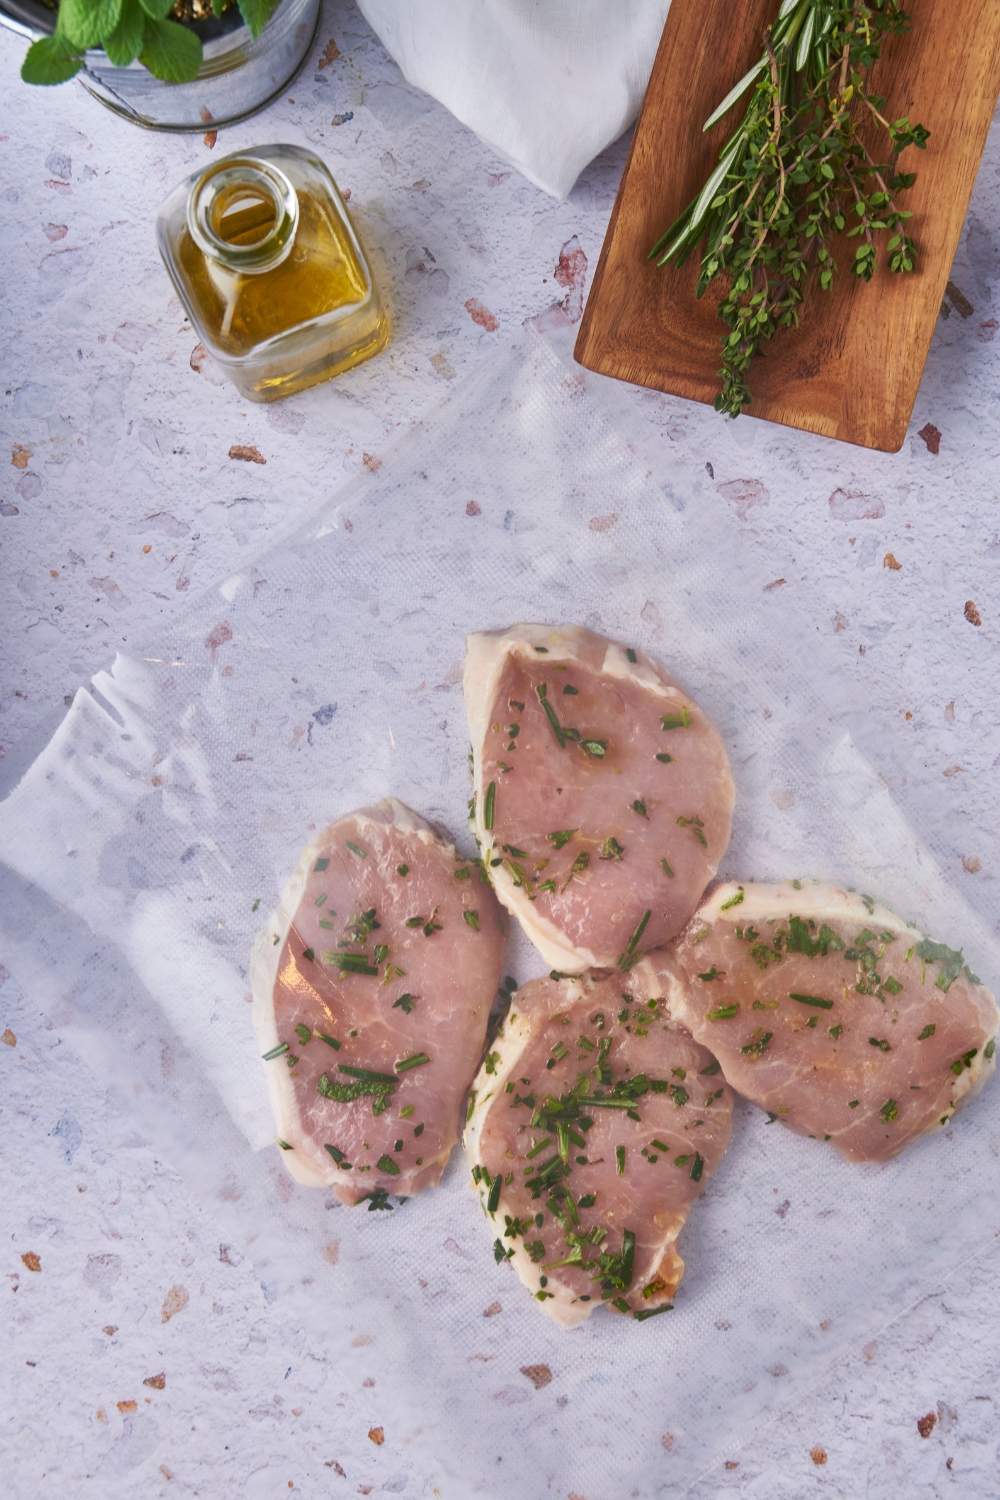 Four pork chops in a vacuum-sealed bag with fresh herbs. Next to the bag of pork chops is a container of oil and a bunch of fresh herbs.